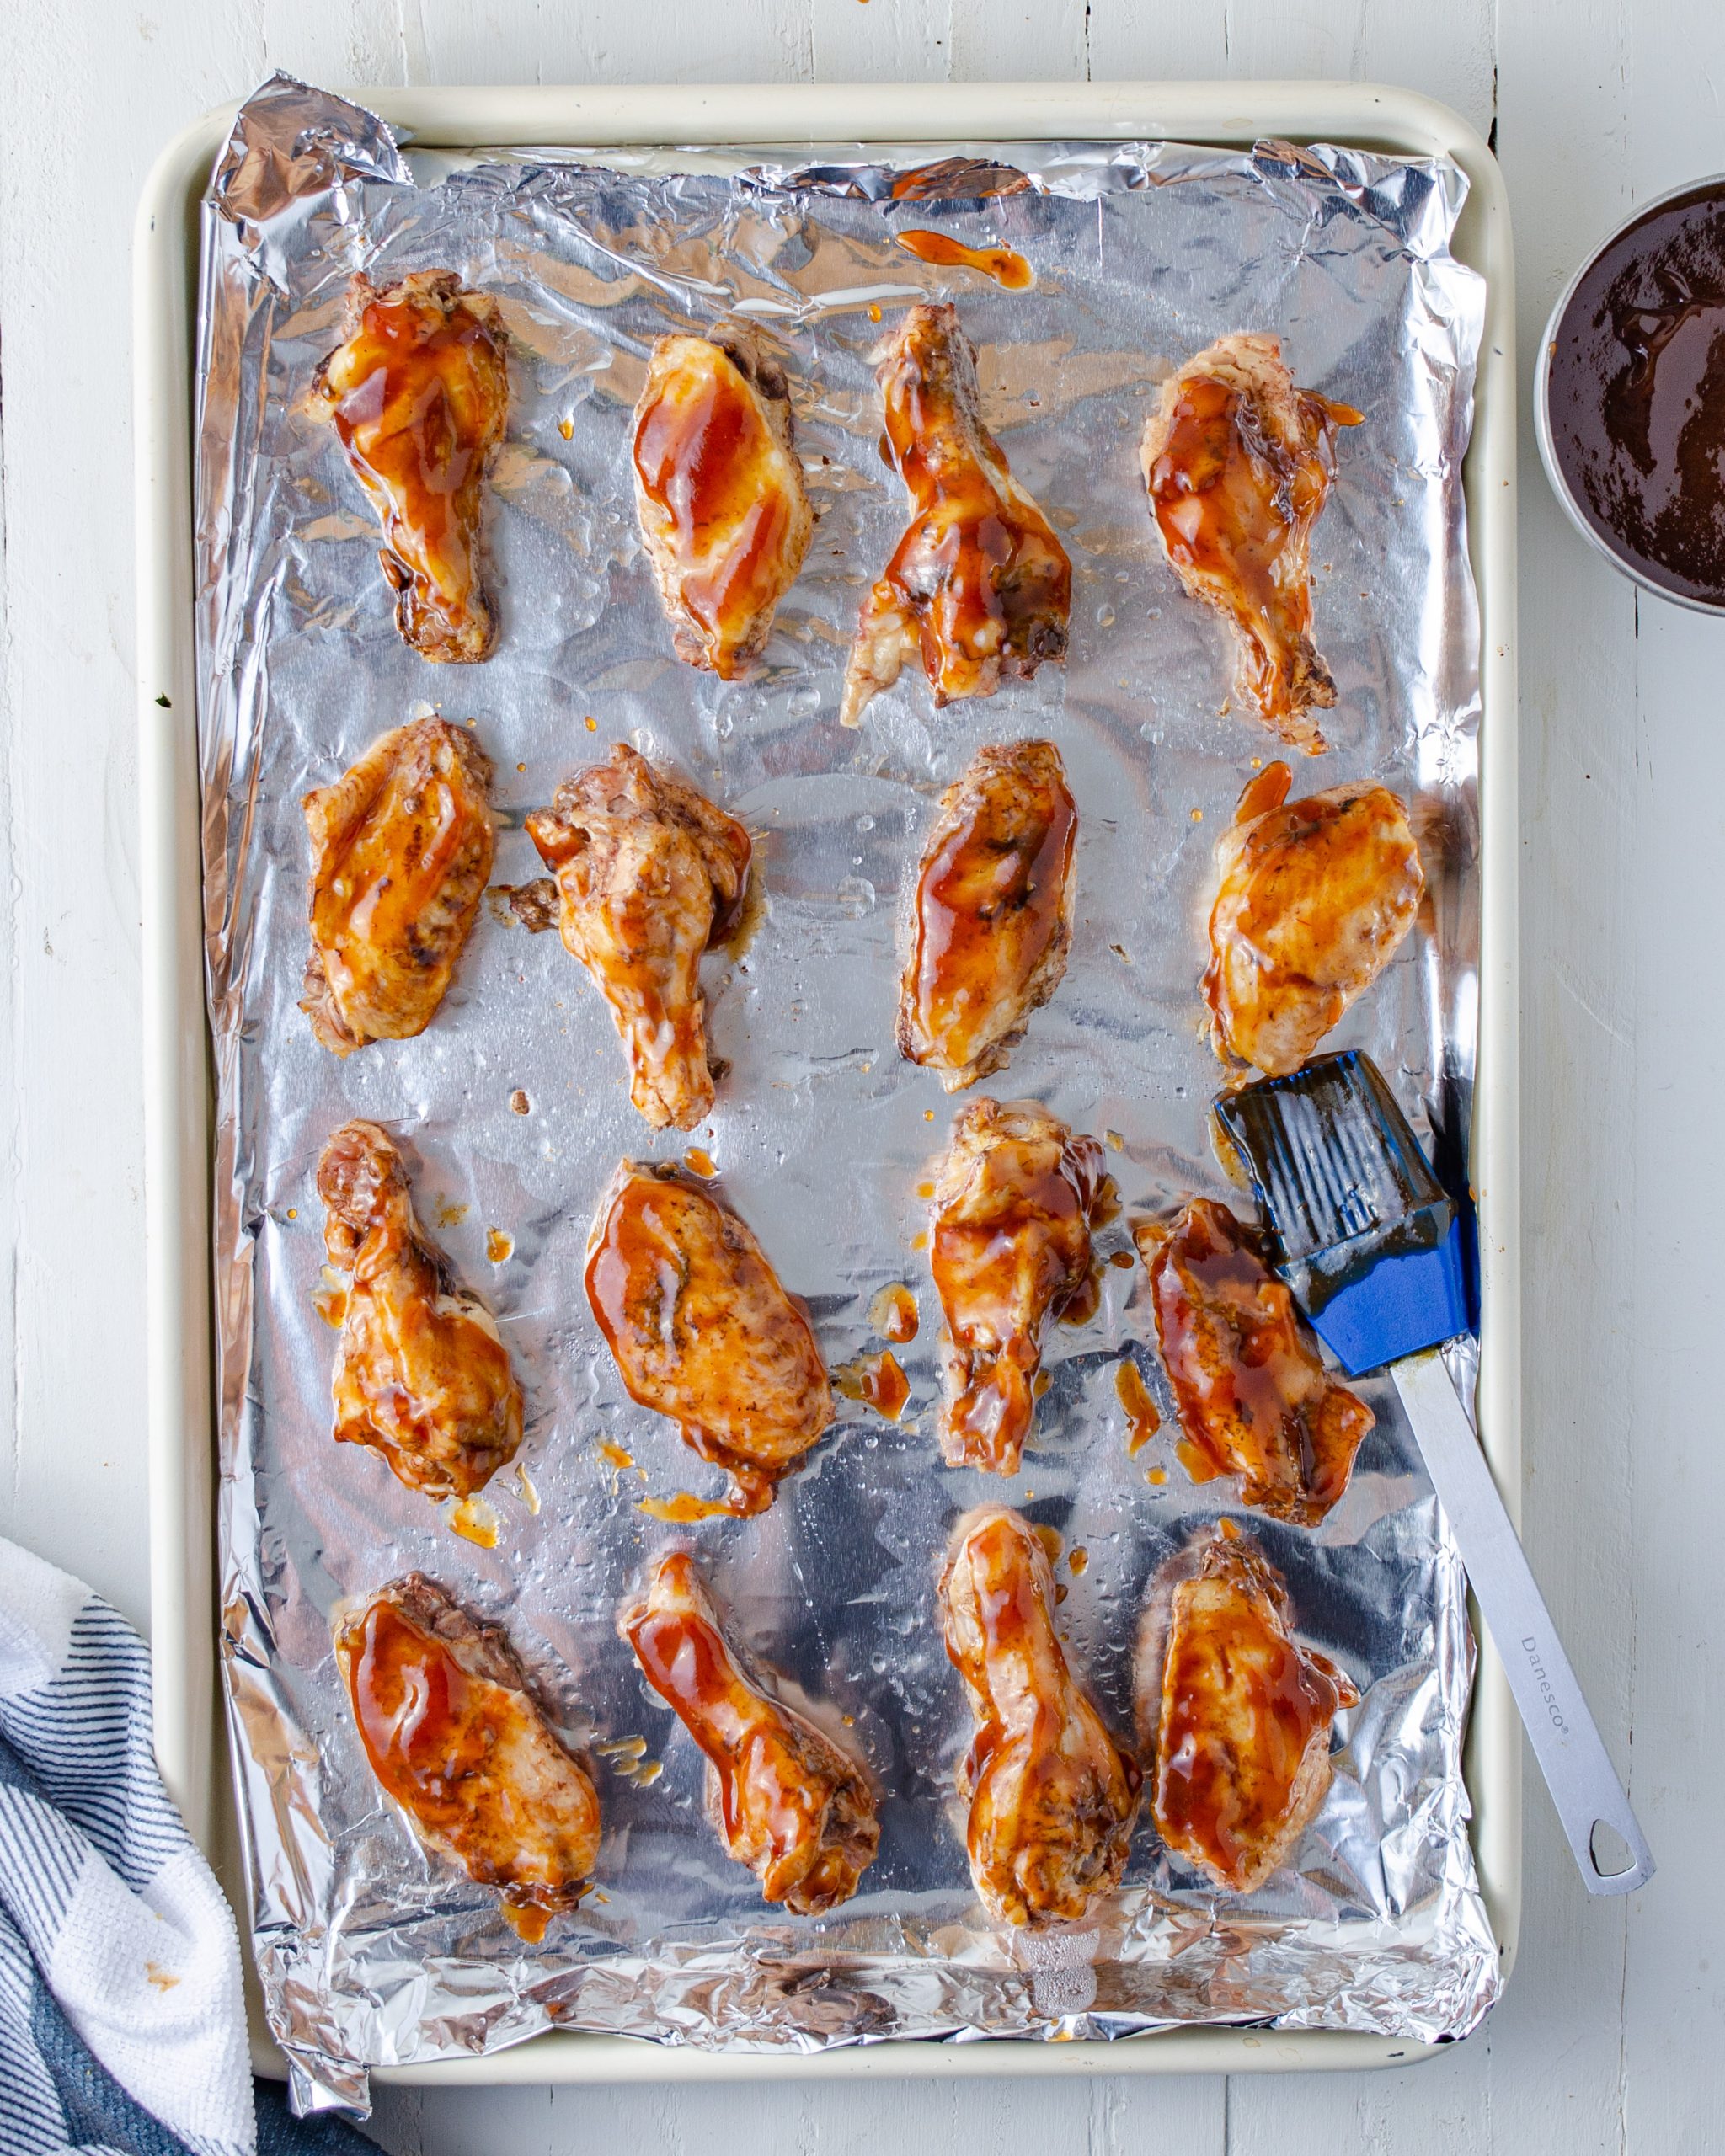 Coat the wings in the bbq sauce. 